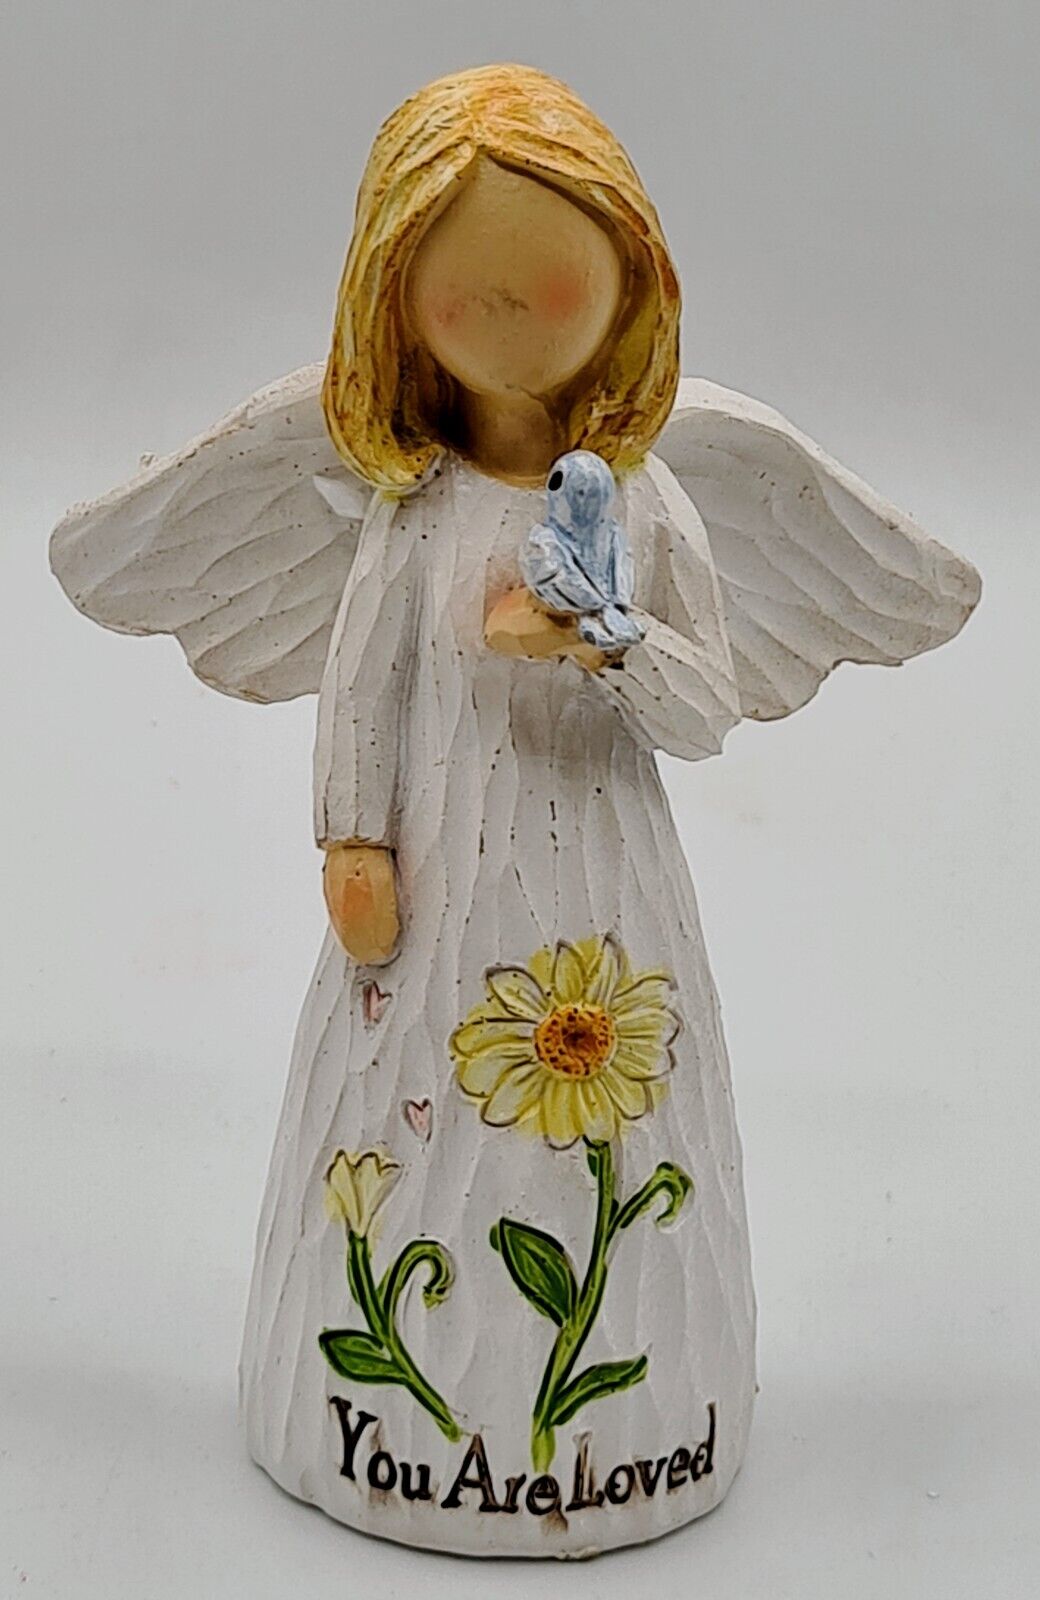 You Are Loved Inspirational Angel Resin Figurine Decor Gift 4.5\